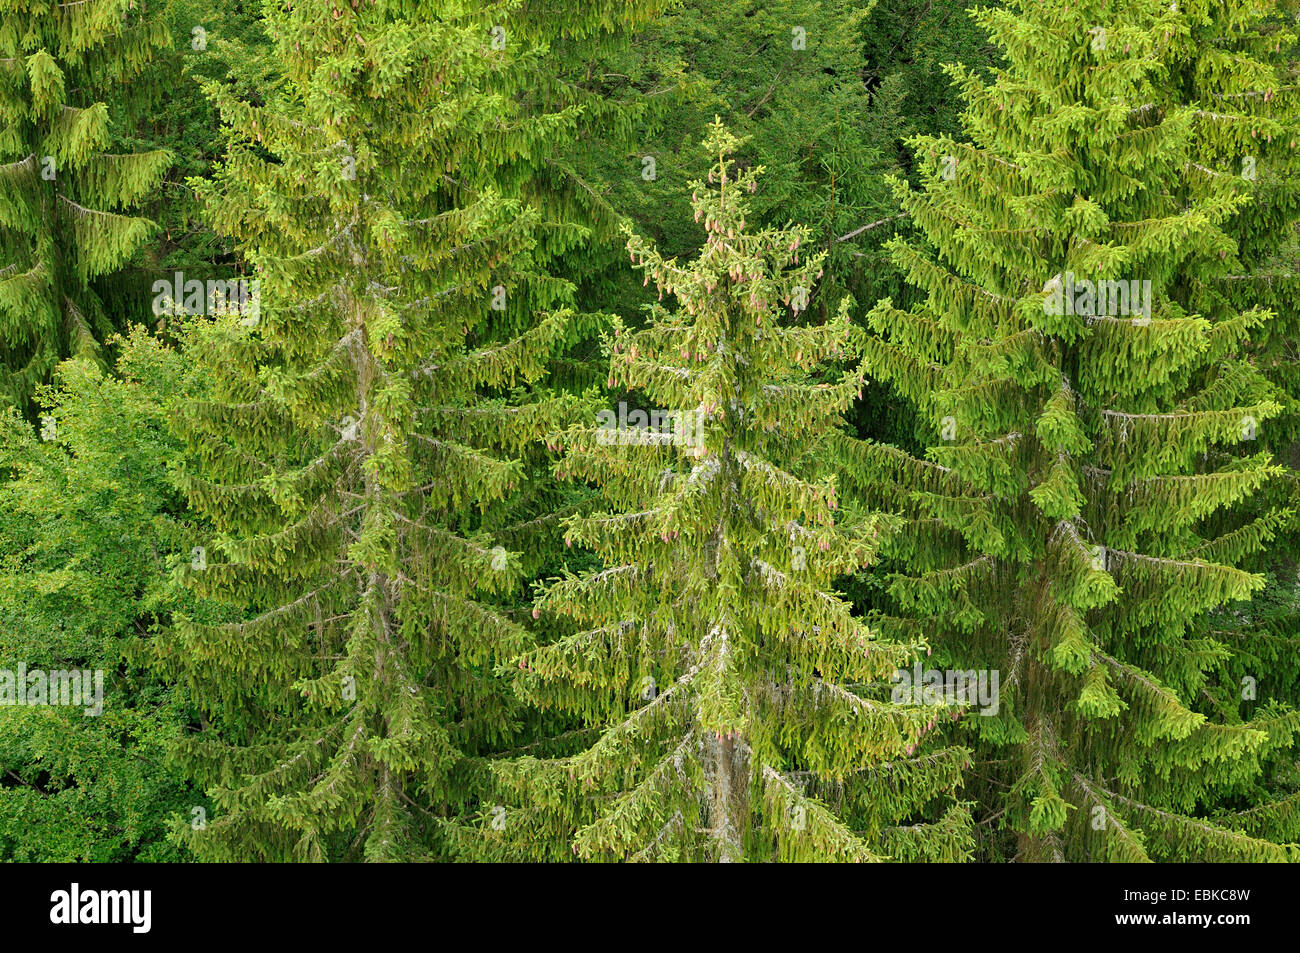 Norway spruce (Picea abies), pruce forest, Germany, Bavaria, Bavarian Forest National Park Stock Photo